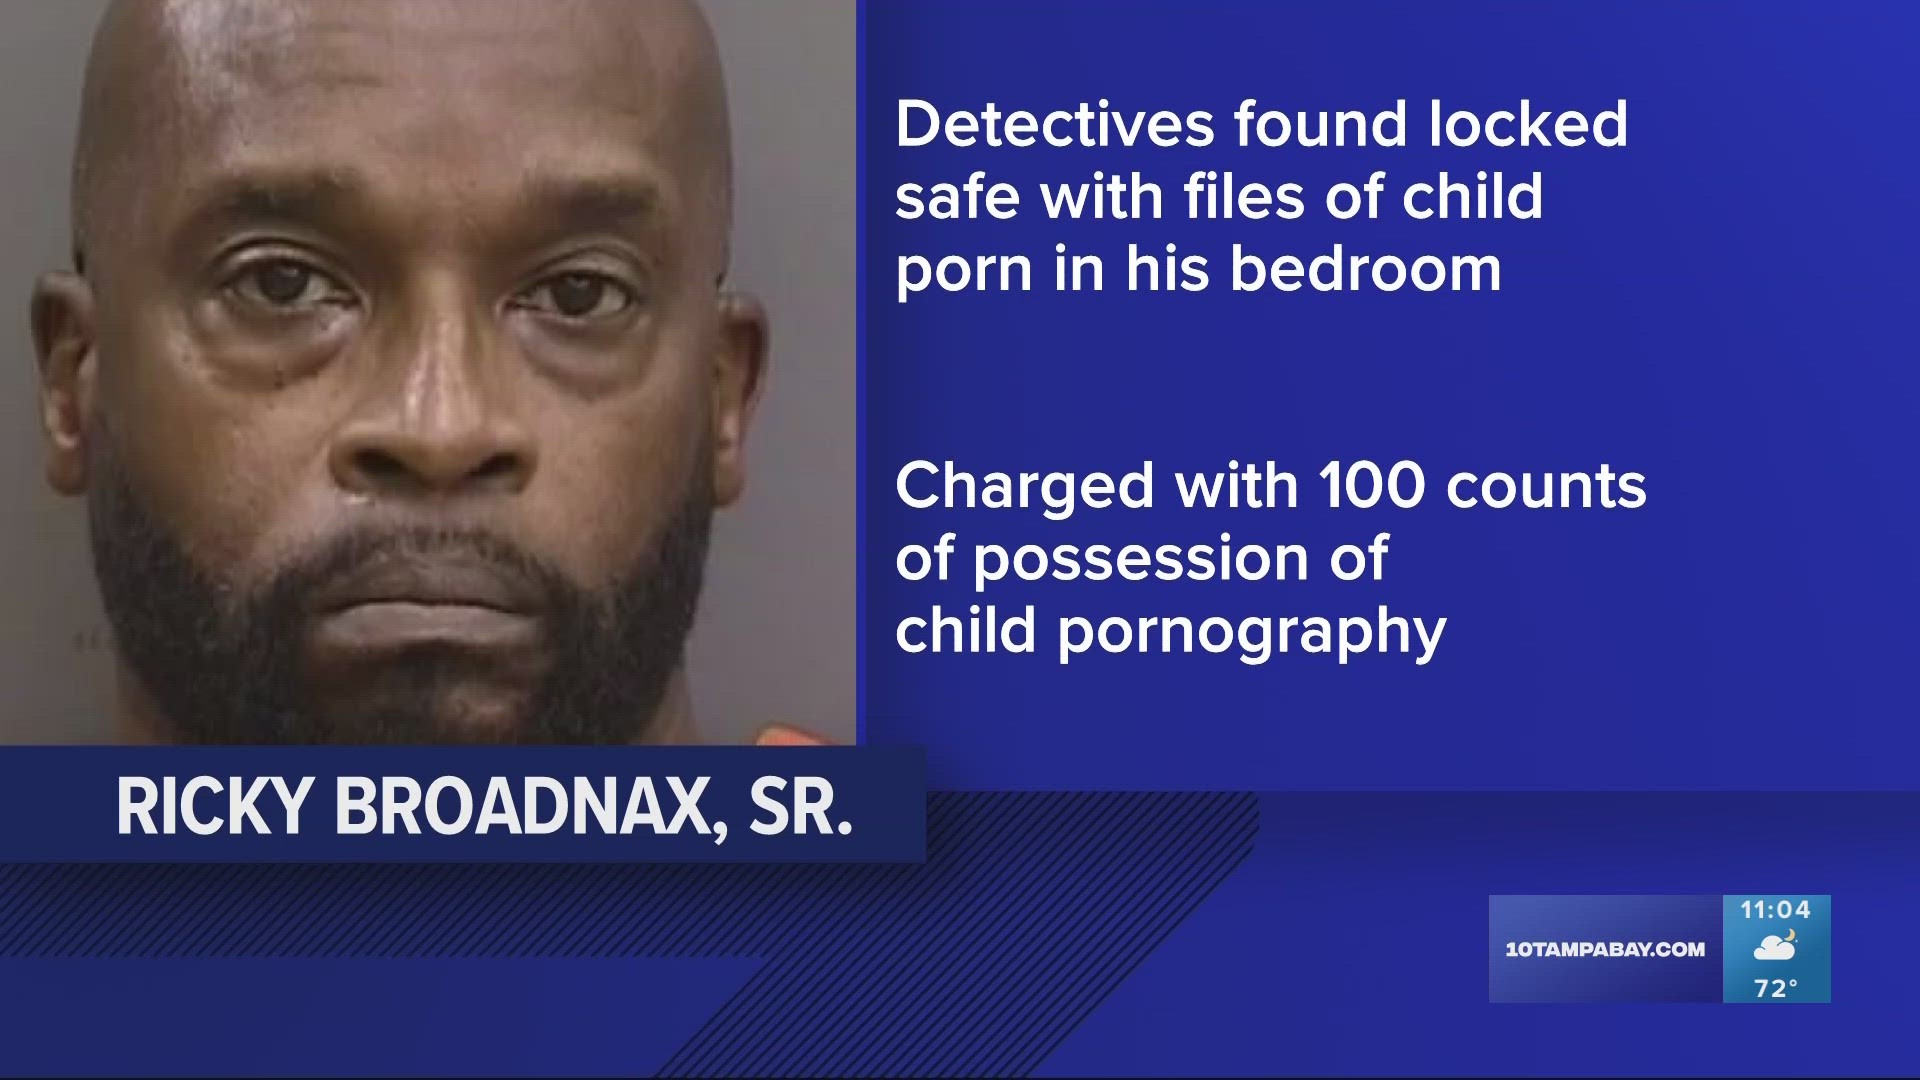 At this time, there are no listed victims related to his employment at Liberty Middle School, however, the investigation is active, police say.